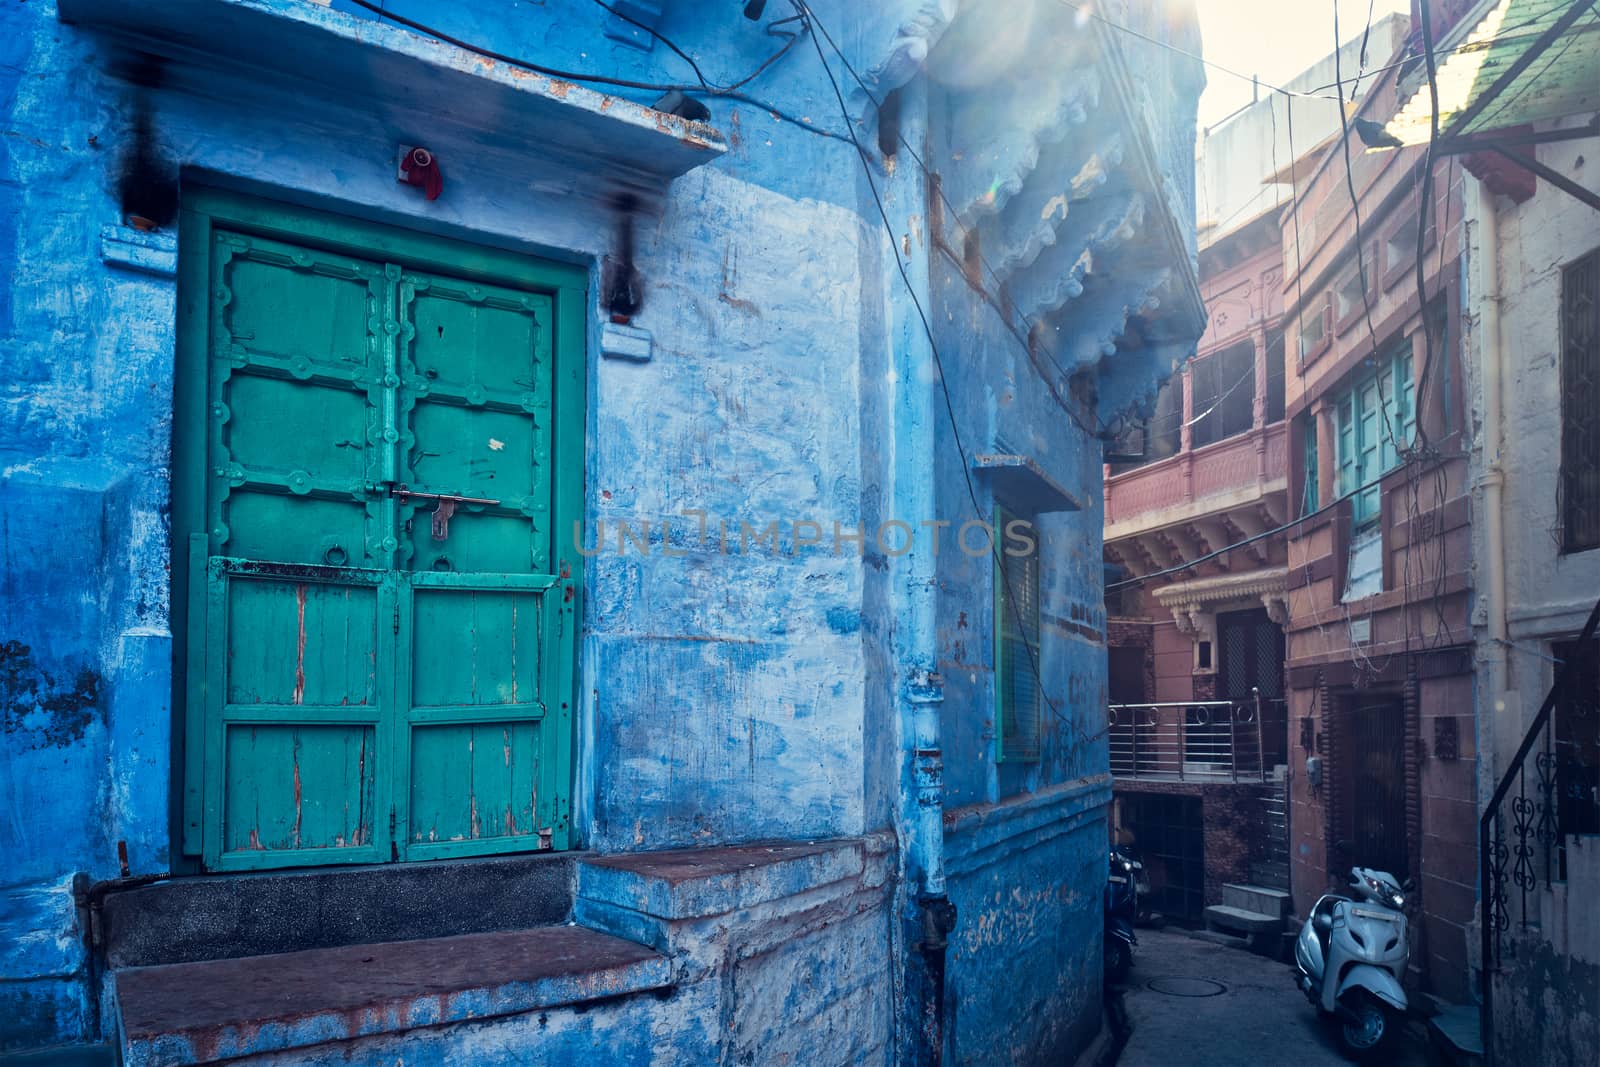 Blue houses in streets of of Jodhpur, also known as "Blue City" due to the vivid blue-painted Brahmin houses, Jodhpur, Rajasthan, India